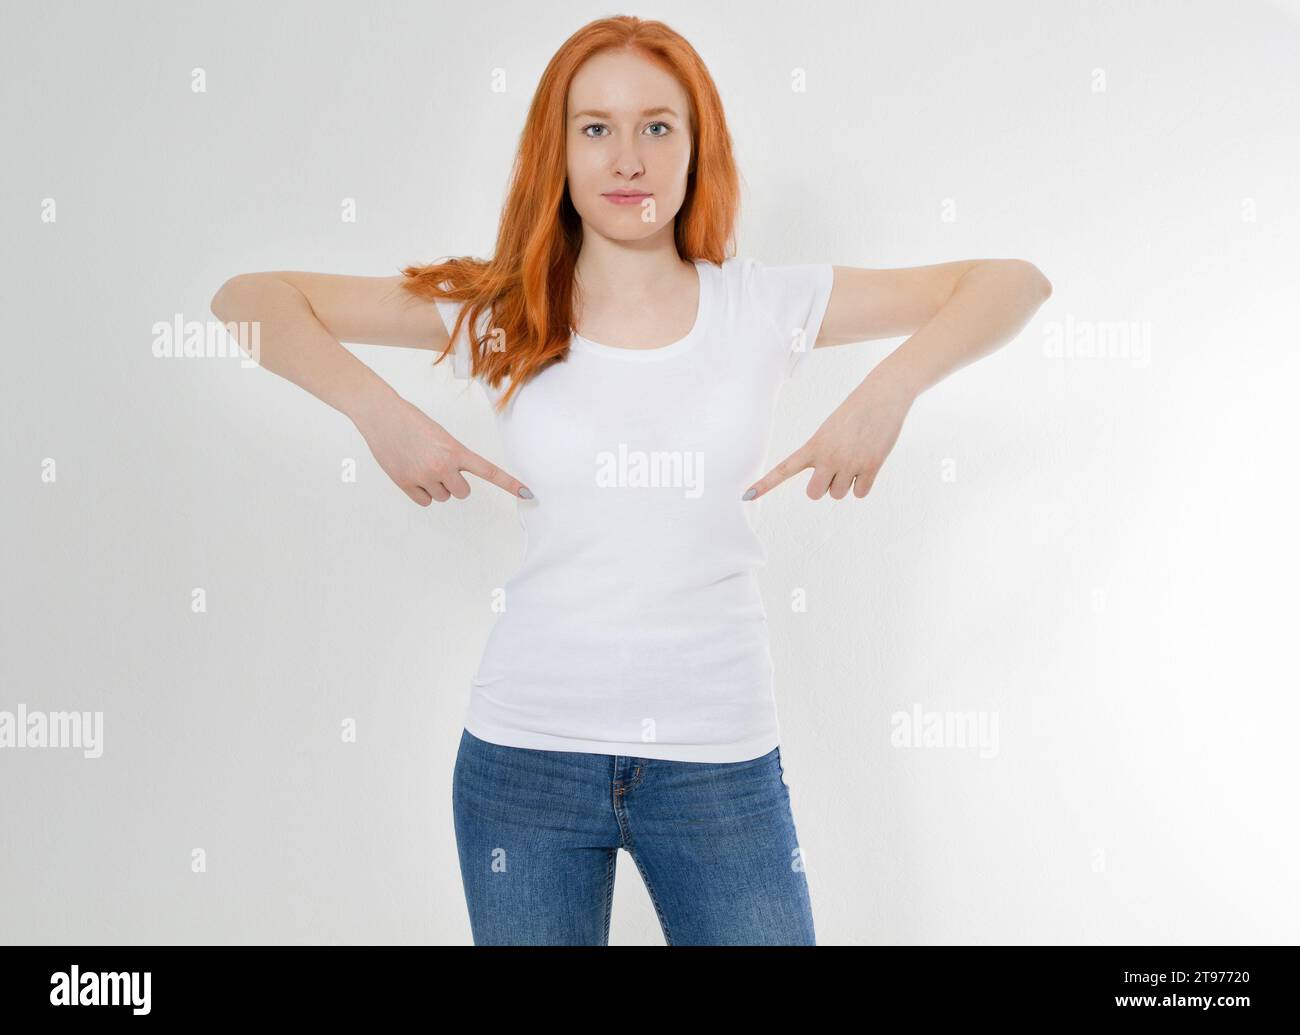 T-shirt design and advertising concept. Style and fashion. Indoor shot of cheerful smiling youngred head woman with red hair pointing index finger at Stock Photo